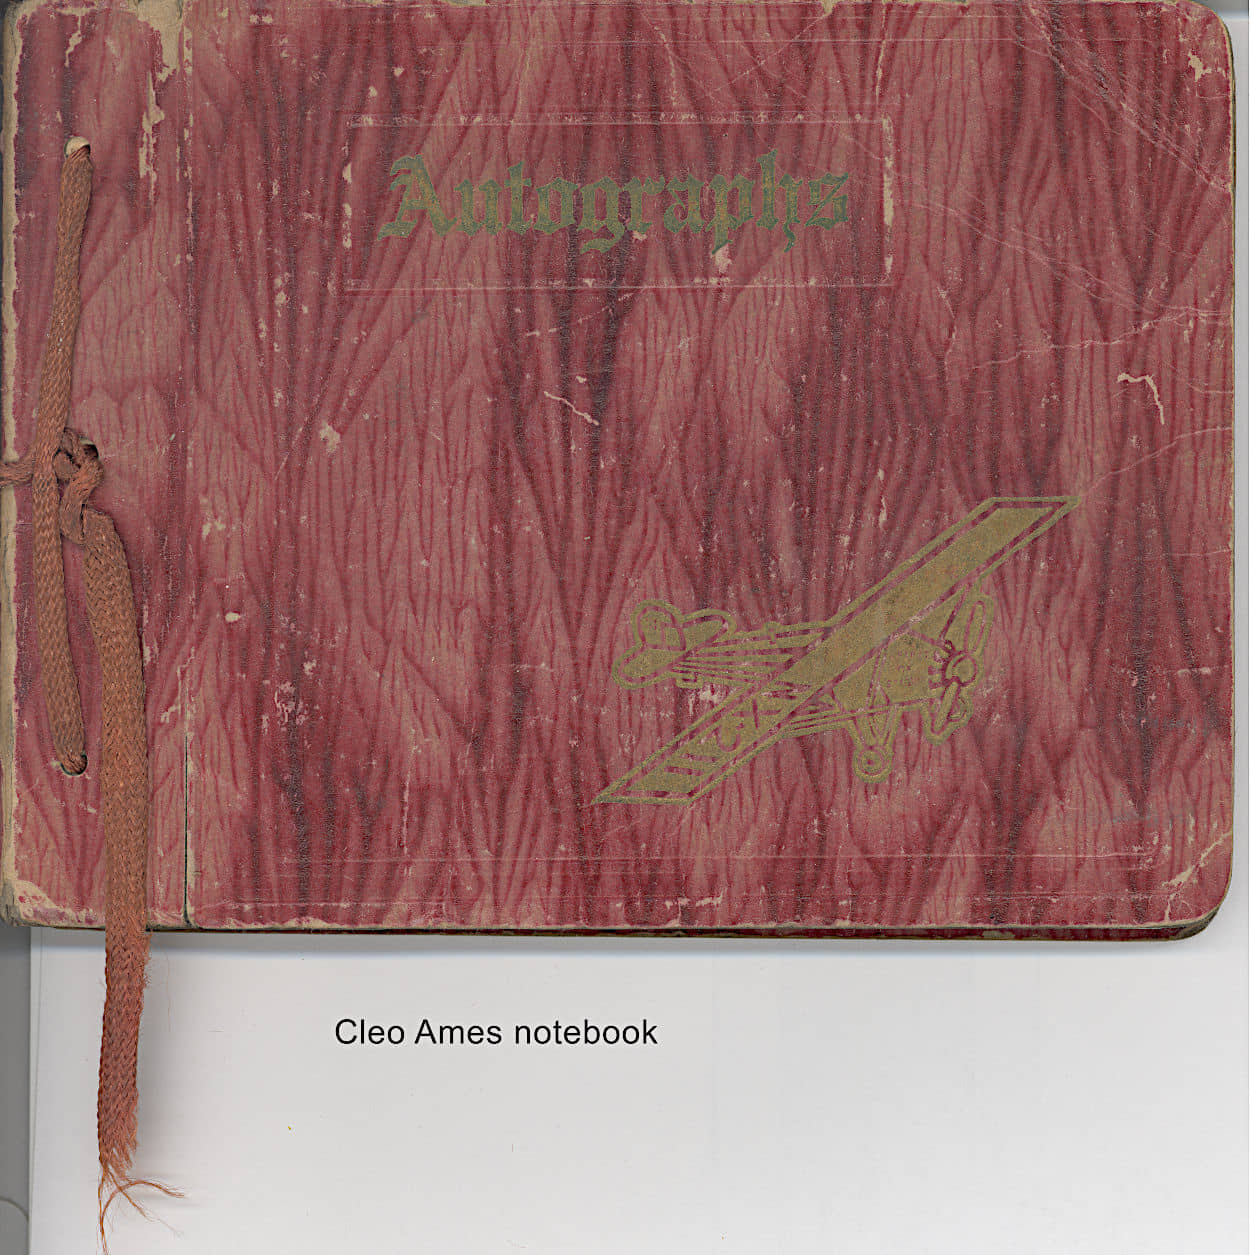 Cleo Ames Notebook